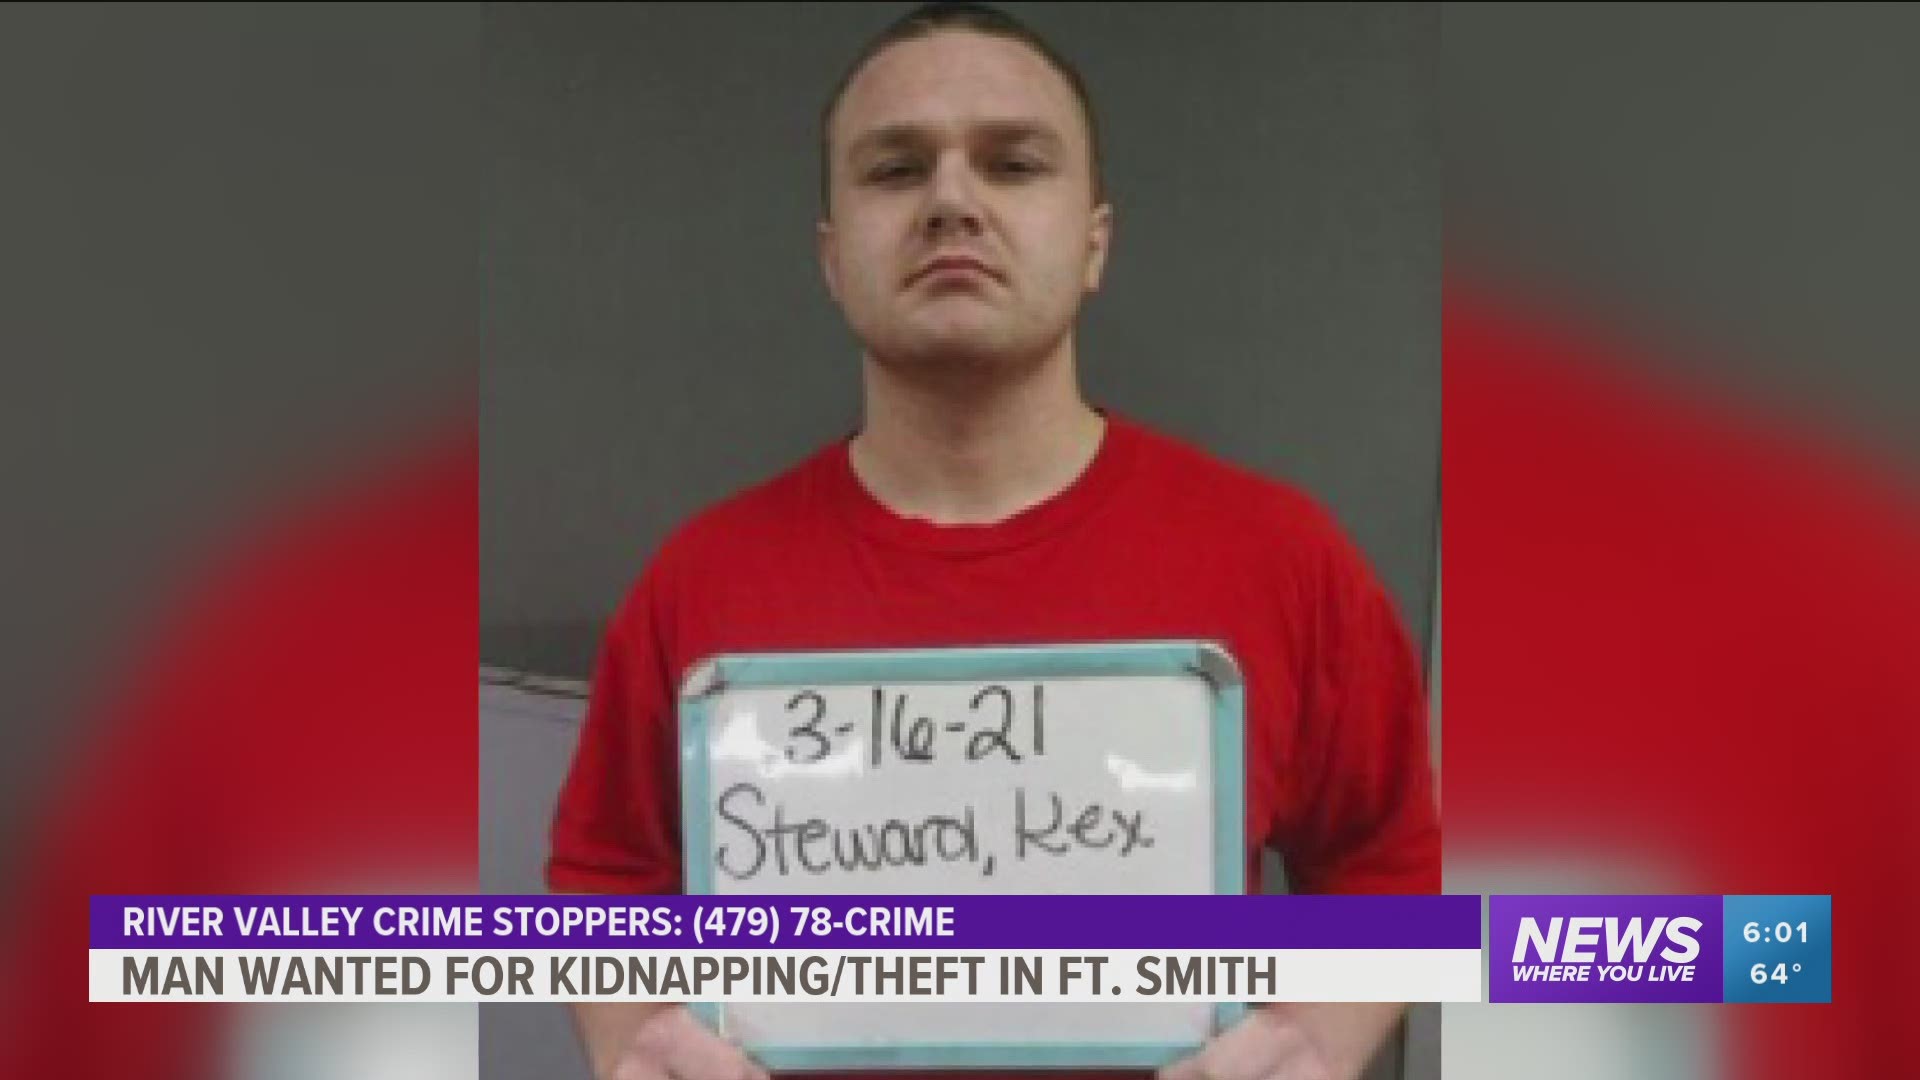 Man wanted for kidnapping and theft in Fort Smith